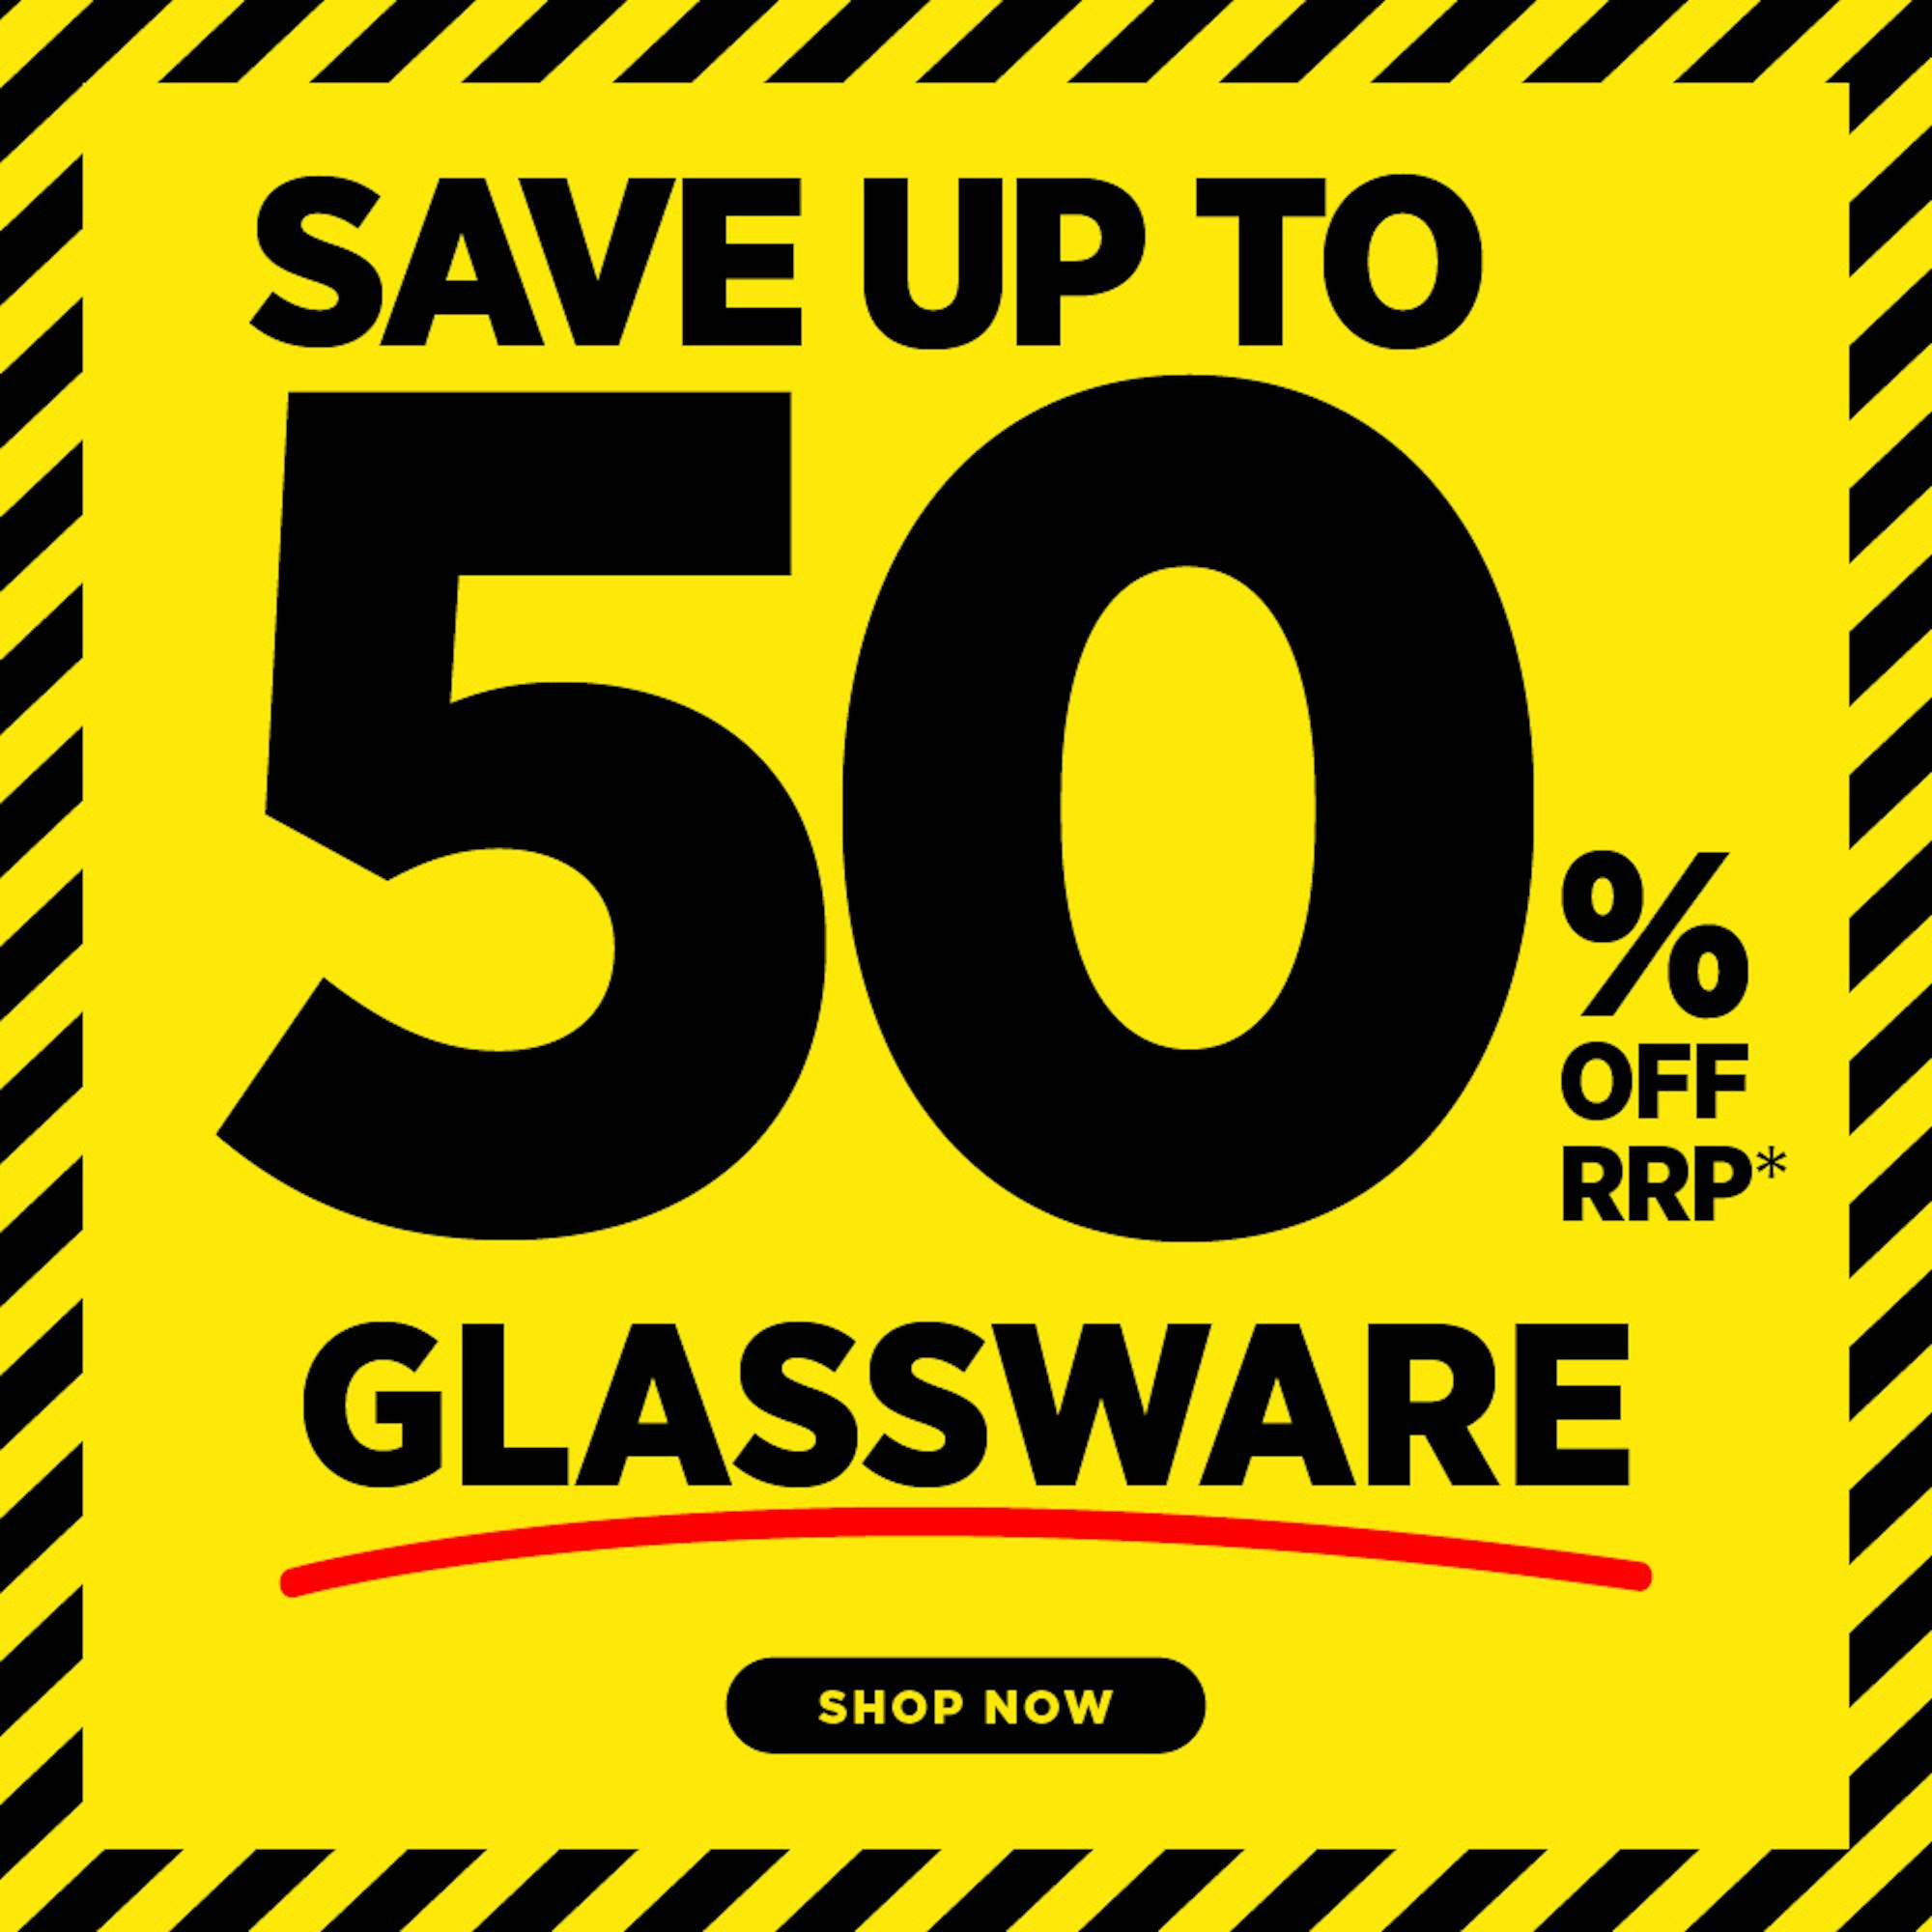 glassware up to 50% off